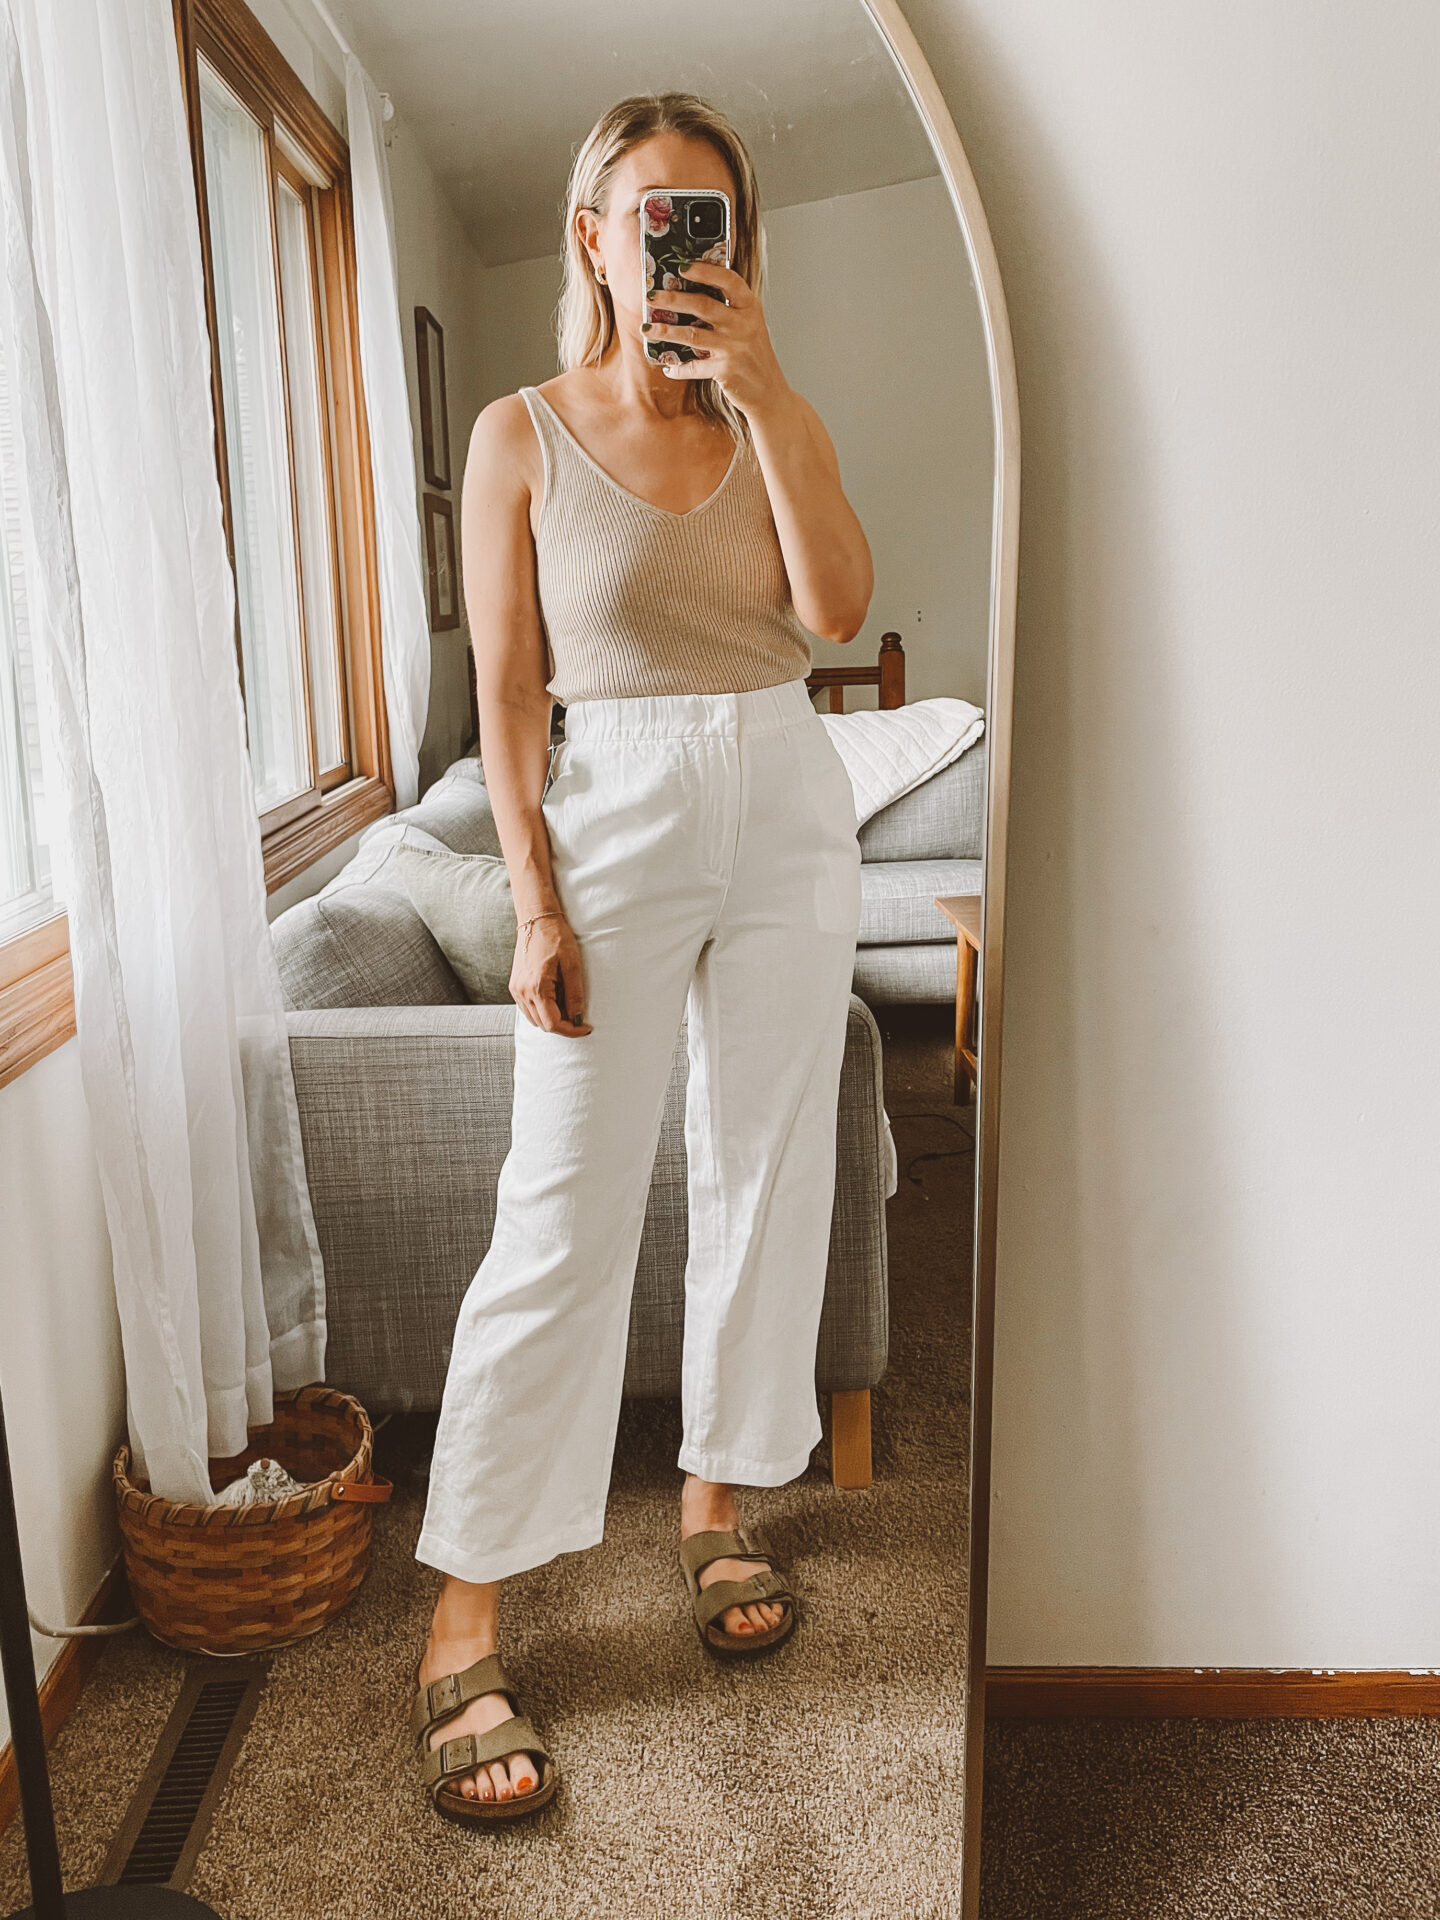 Karin Emily wears a pair of white linen pants from the Gap